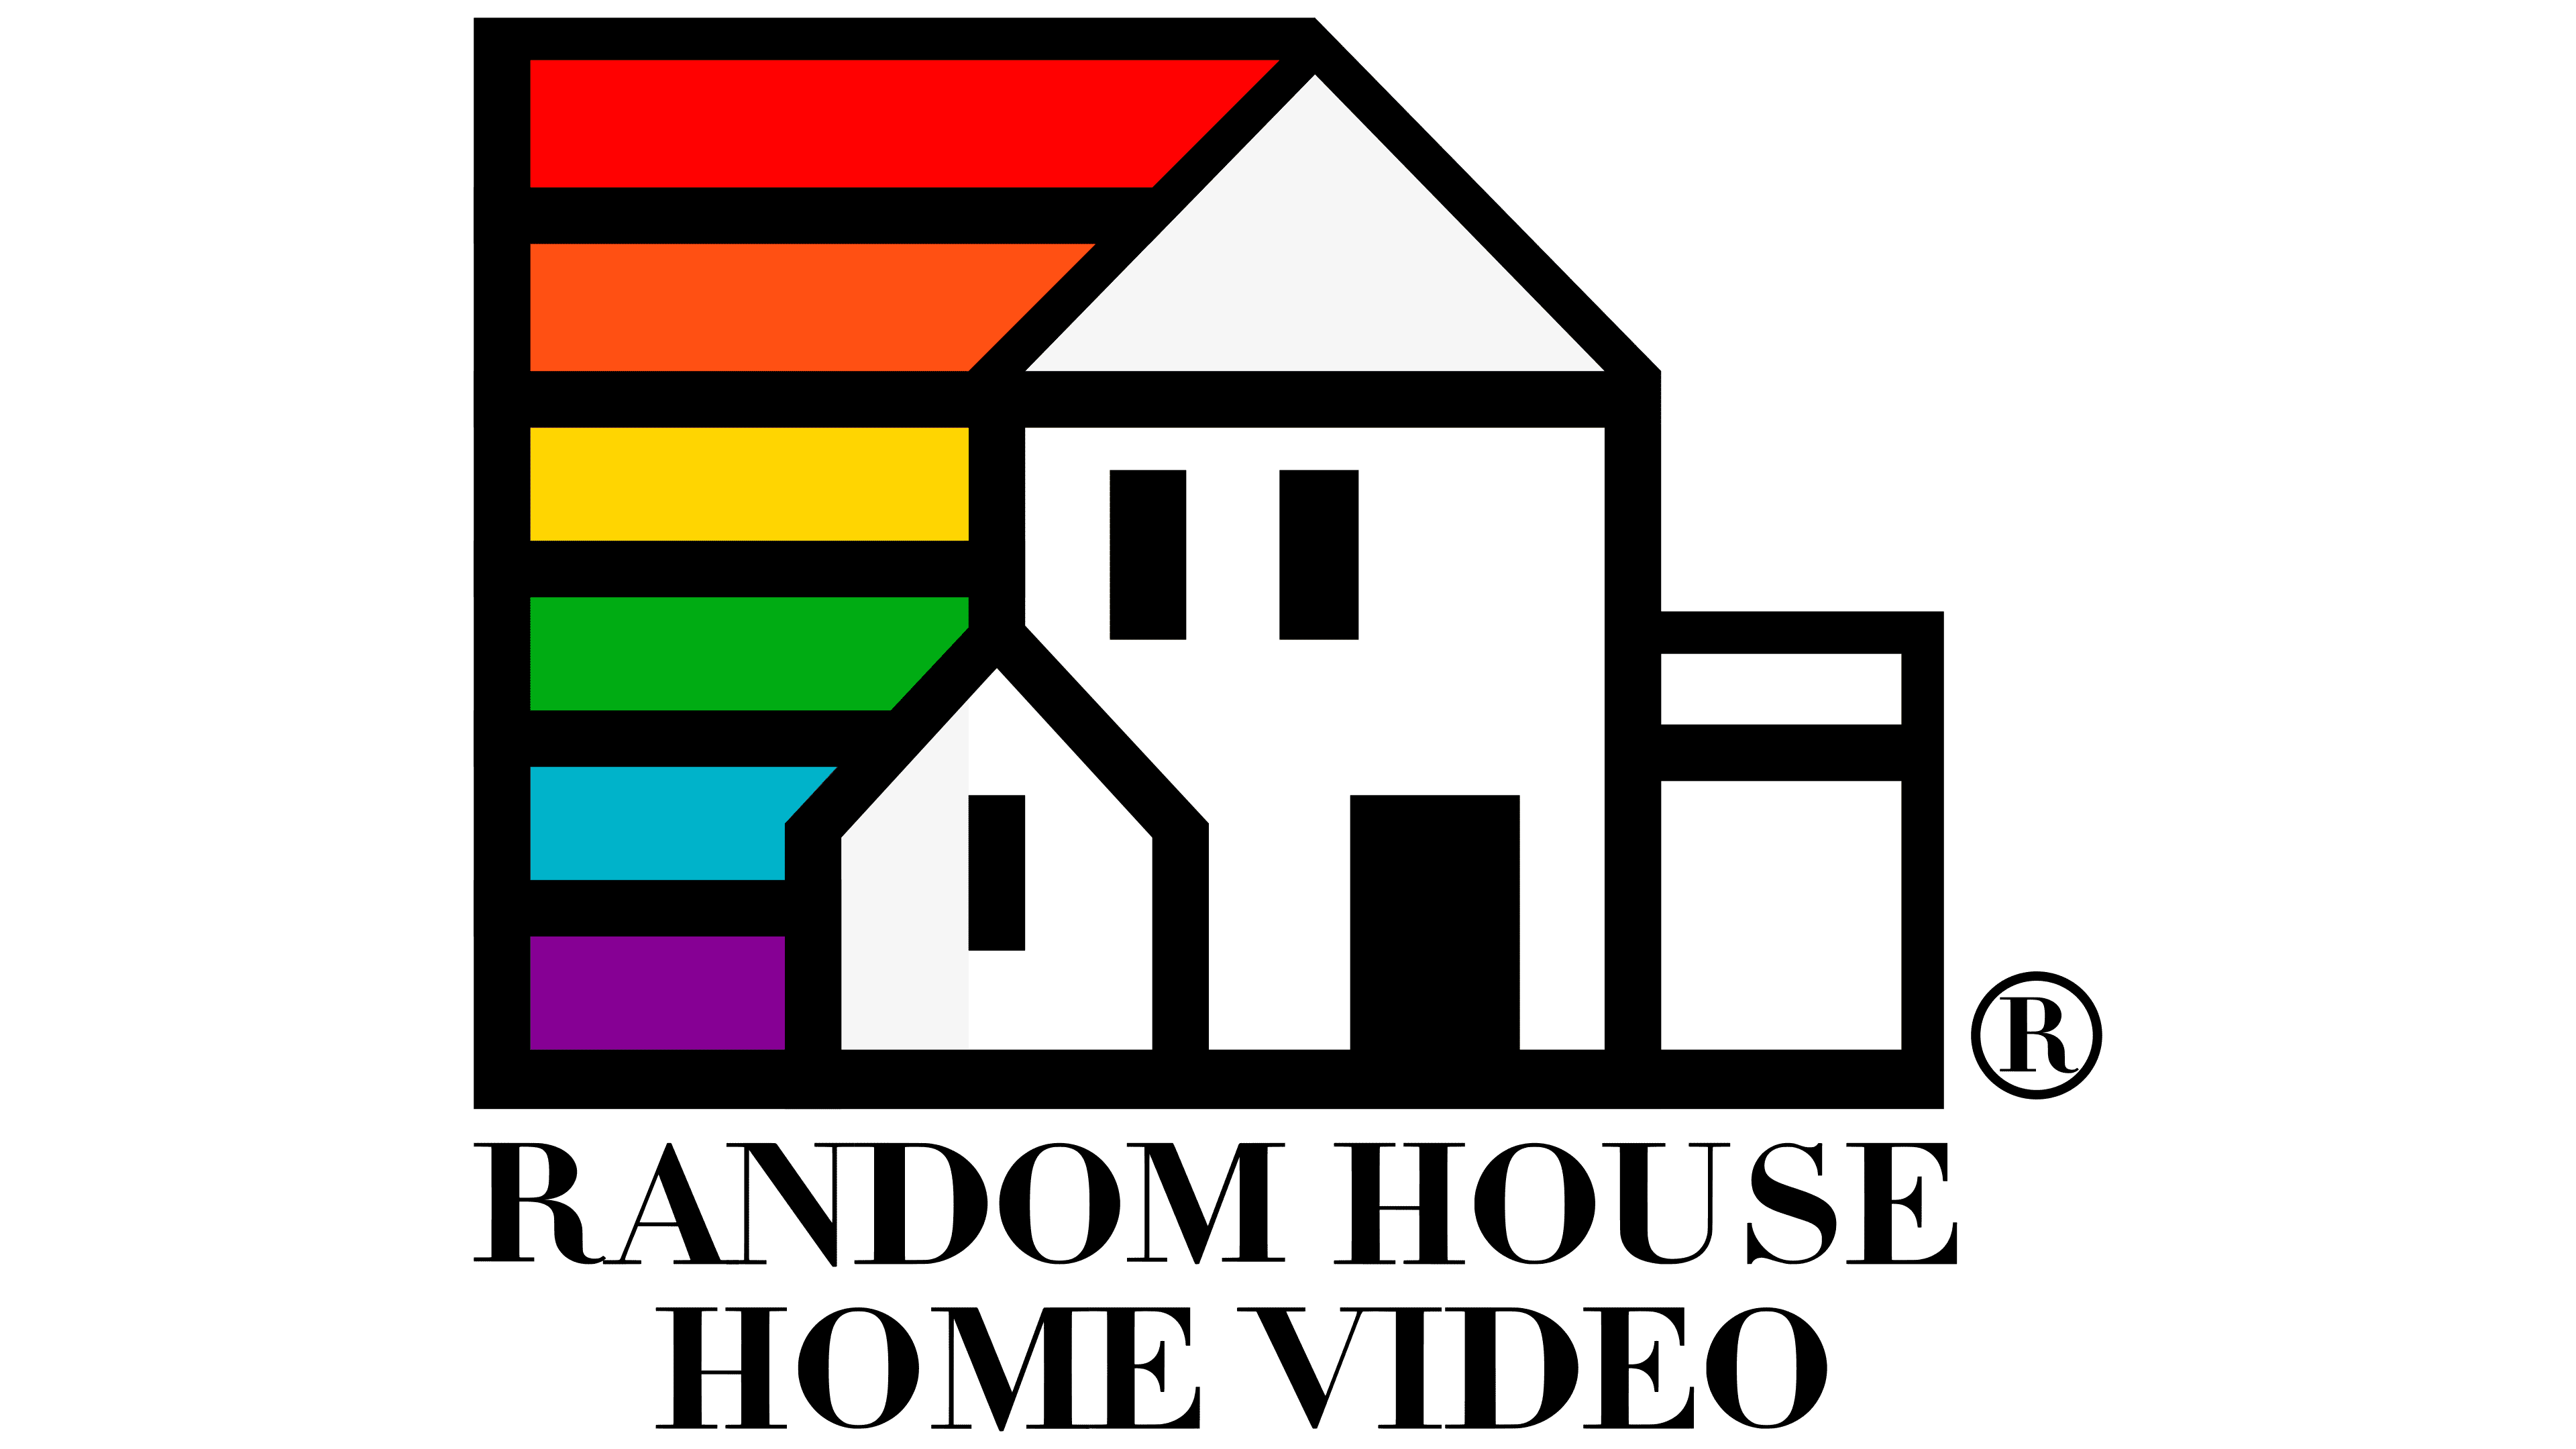 House Logo PNG